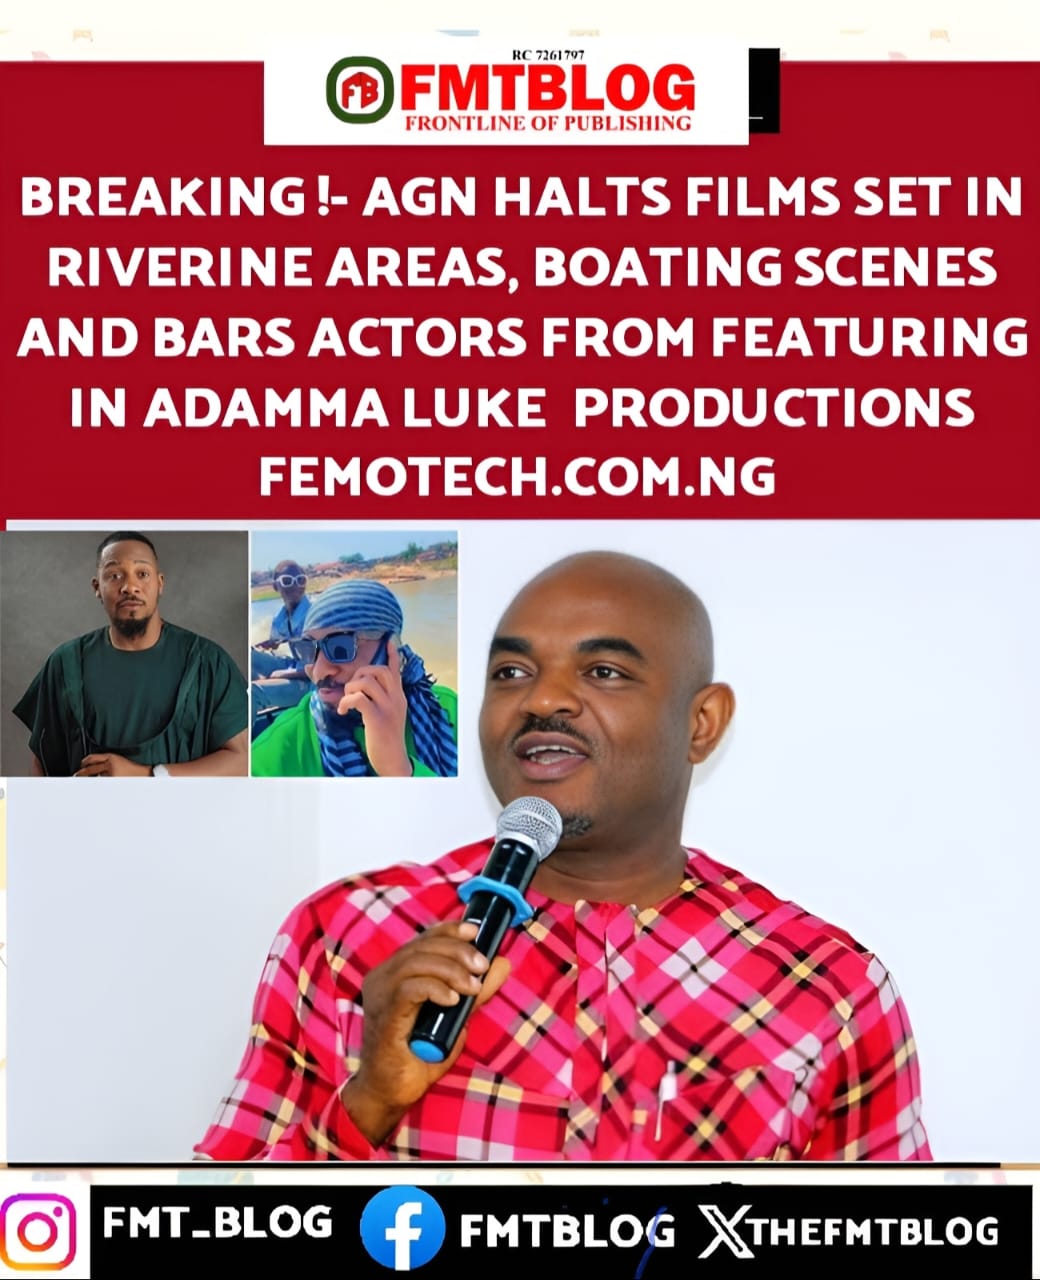 Breaking!- AGN Halts Films Set In Riverine Areas, Boating Scenes And Bars Actors From Featuring In Adamma Luke Productions